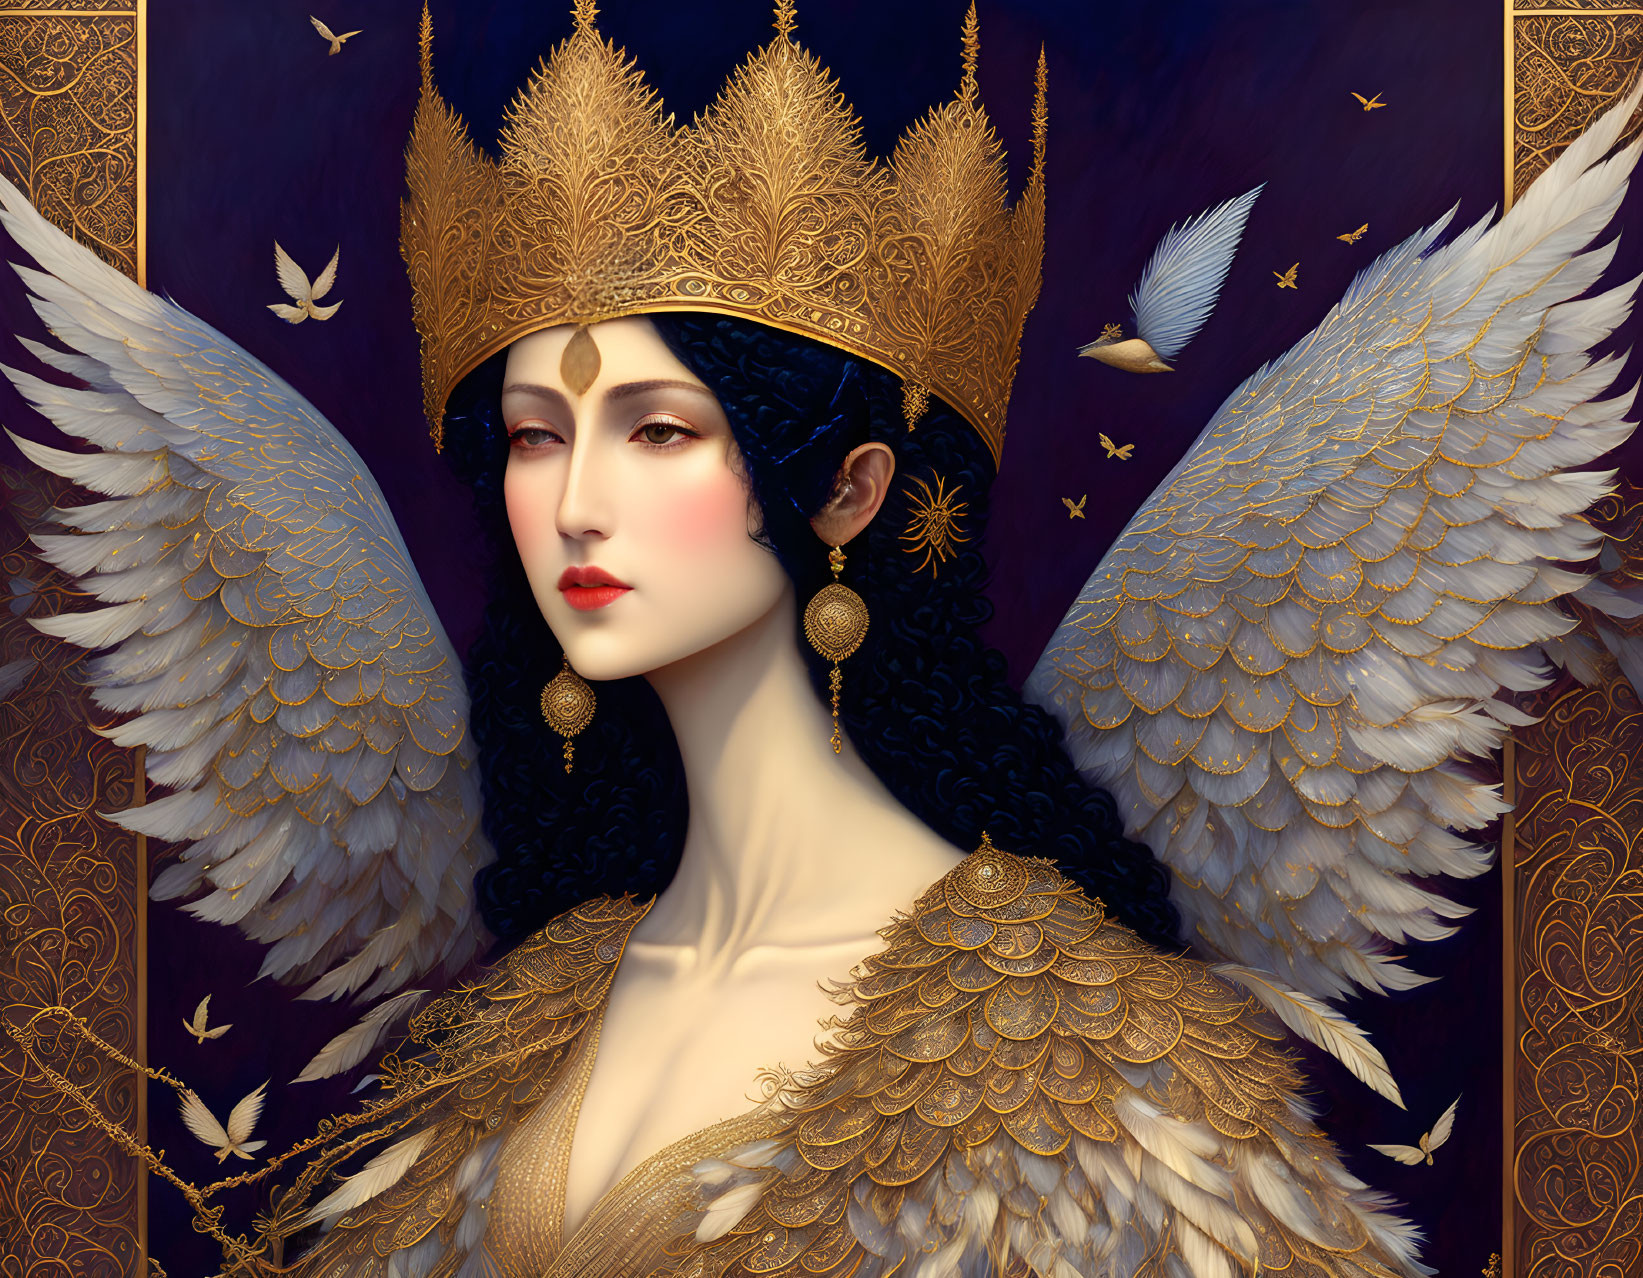 Regal figure with white wings and golden crown in purple backdrop